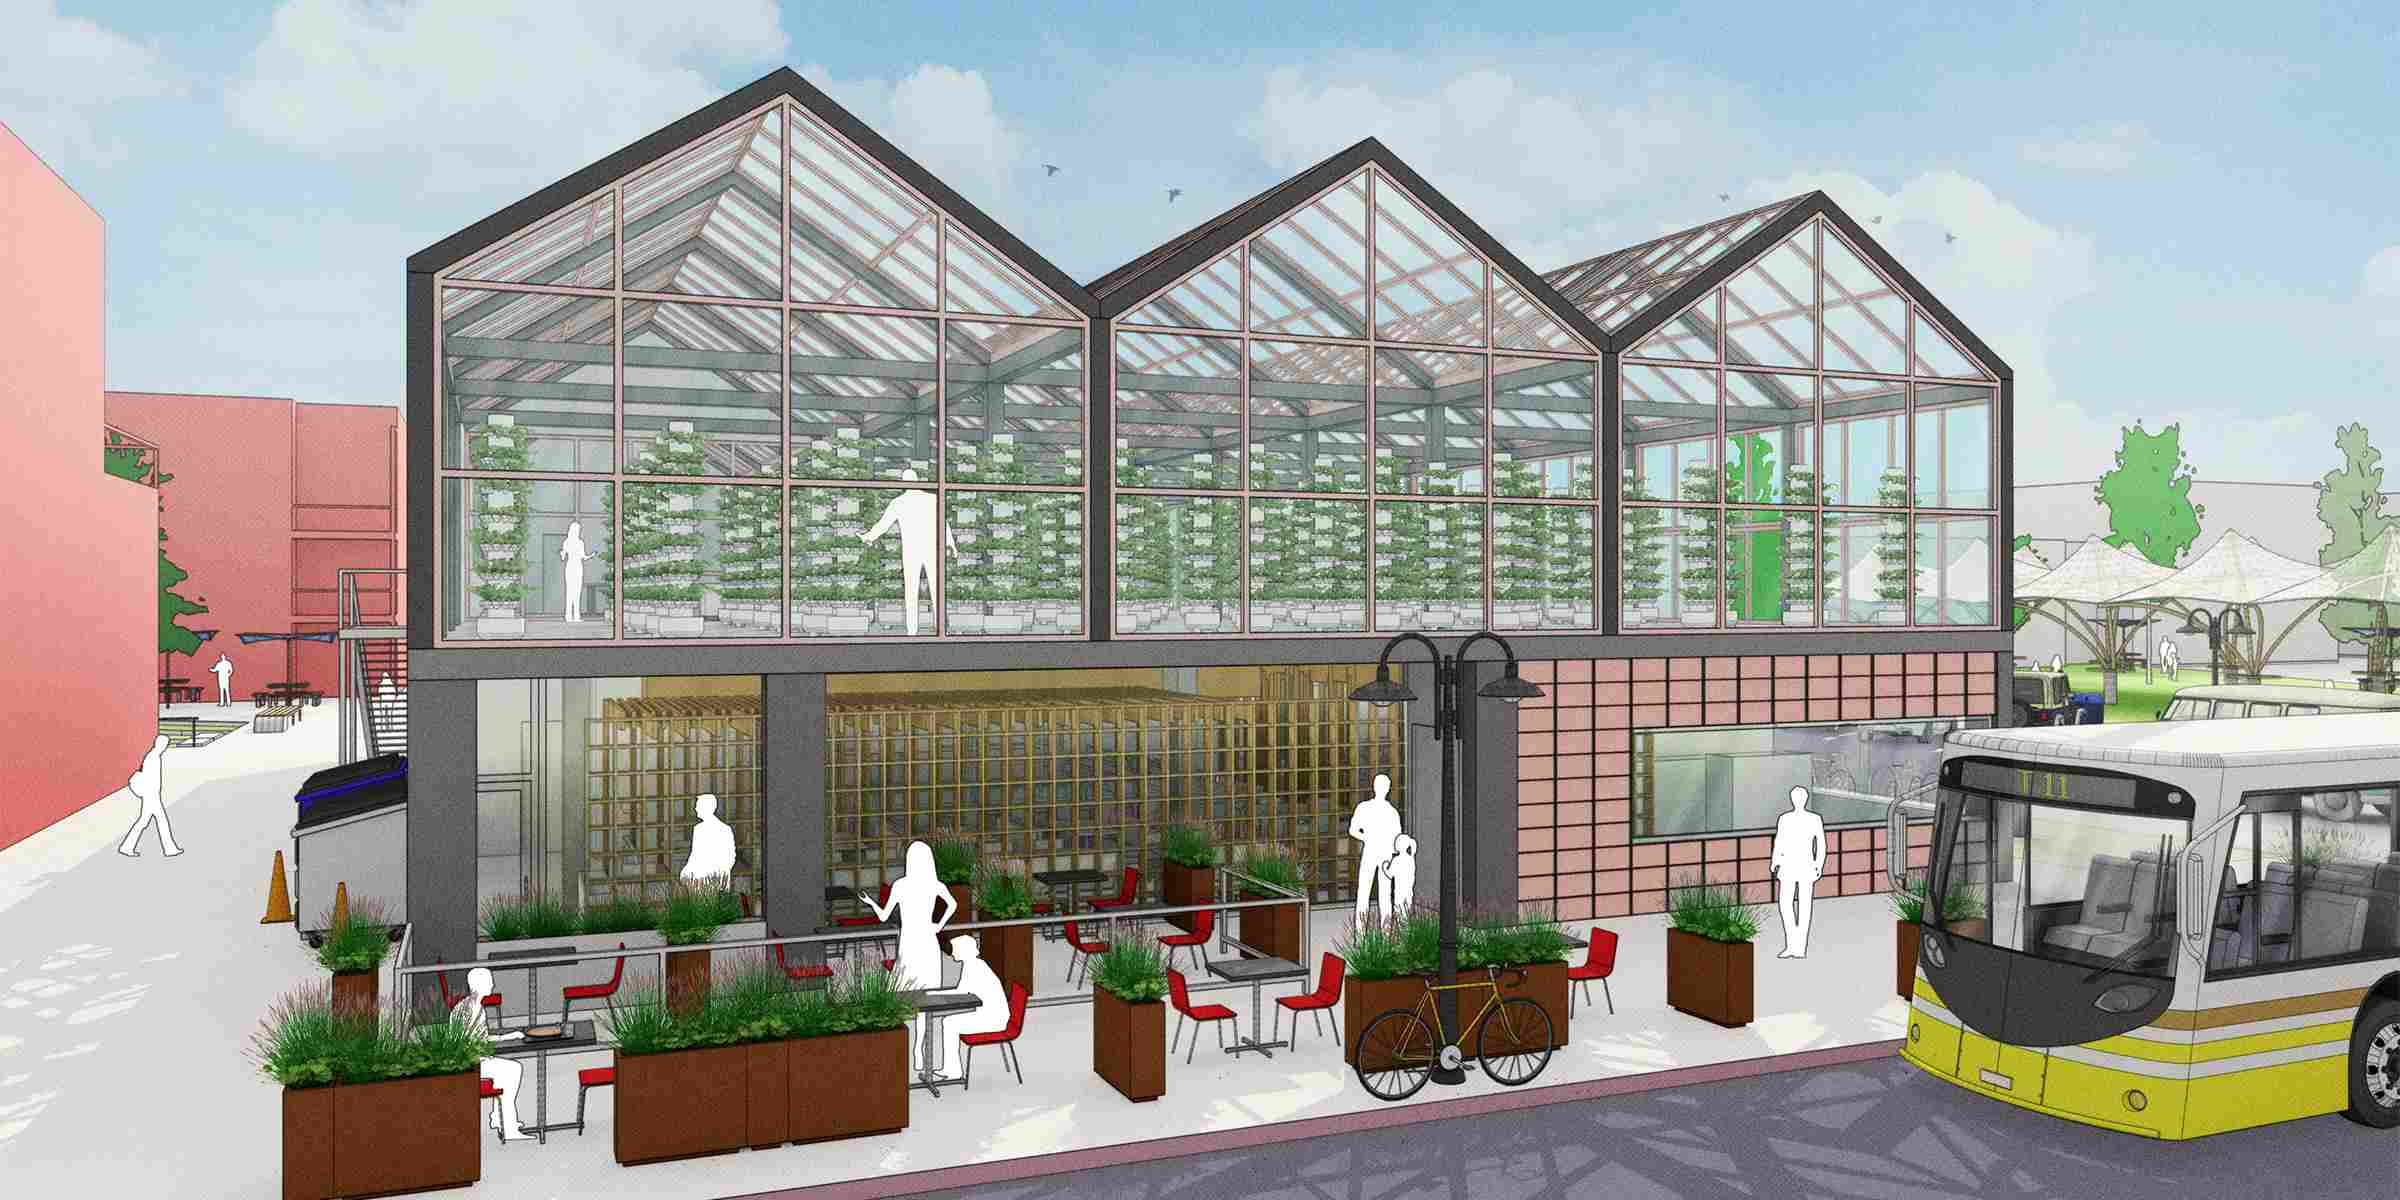 SketchUp Rendering of an urban greenhouse and restaurant